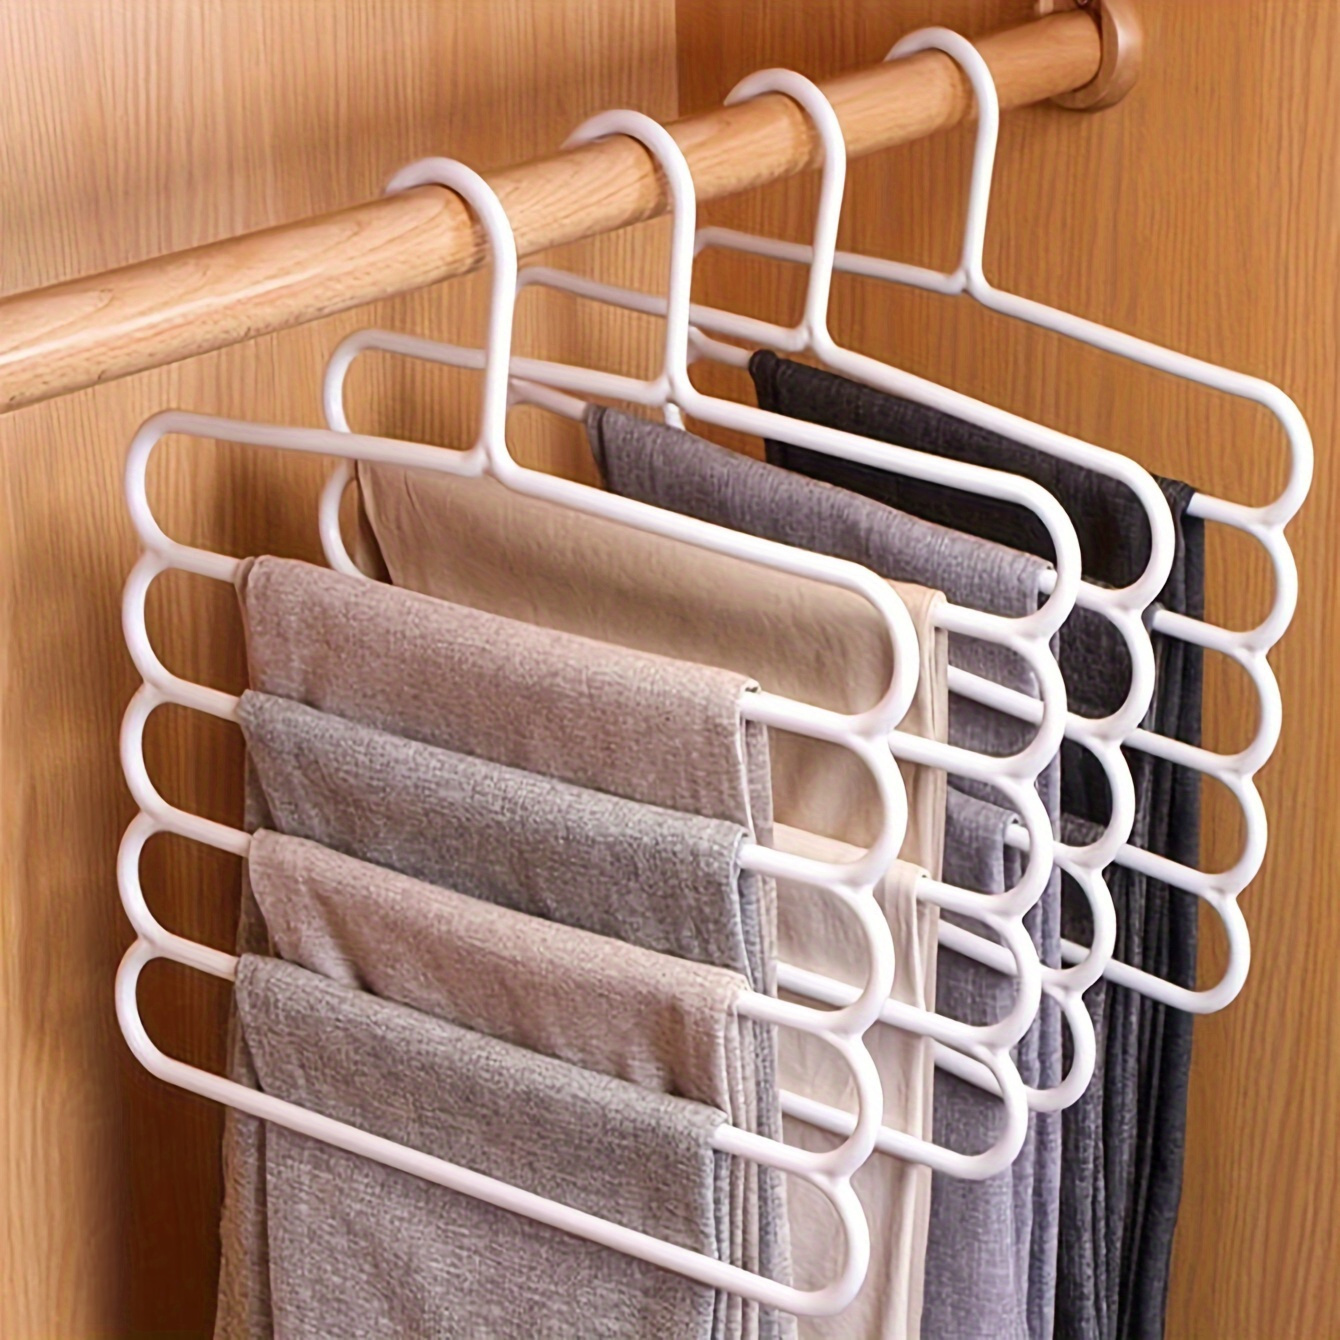 

5-tier Foldable Metal Pants Hanger: Space-saving Organizer For Closet, Wardrobe, Home, Dorm, Bedroom - Non-slip Clothes Rack For Ties, Pants, Scarves